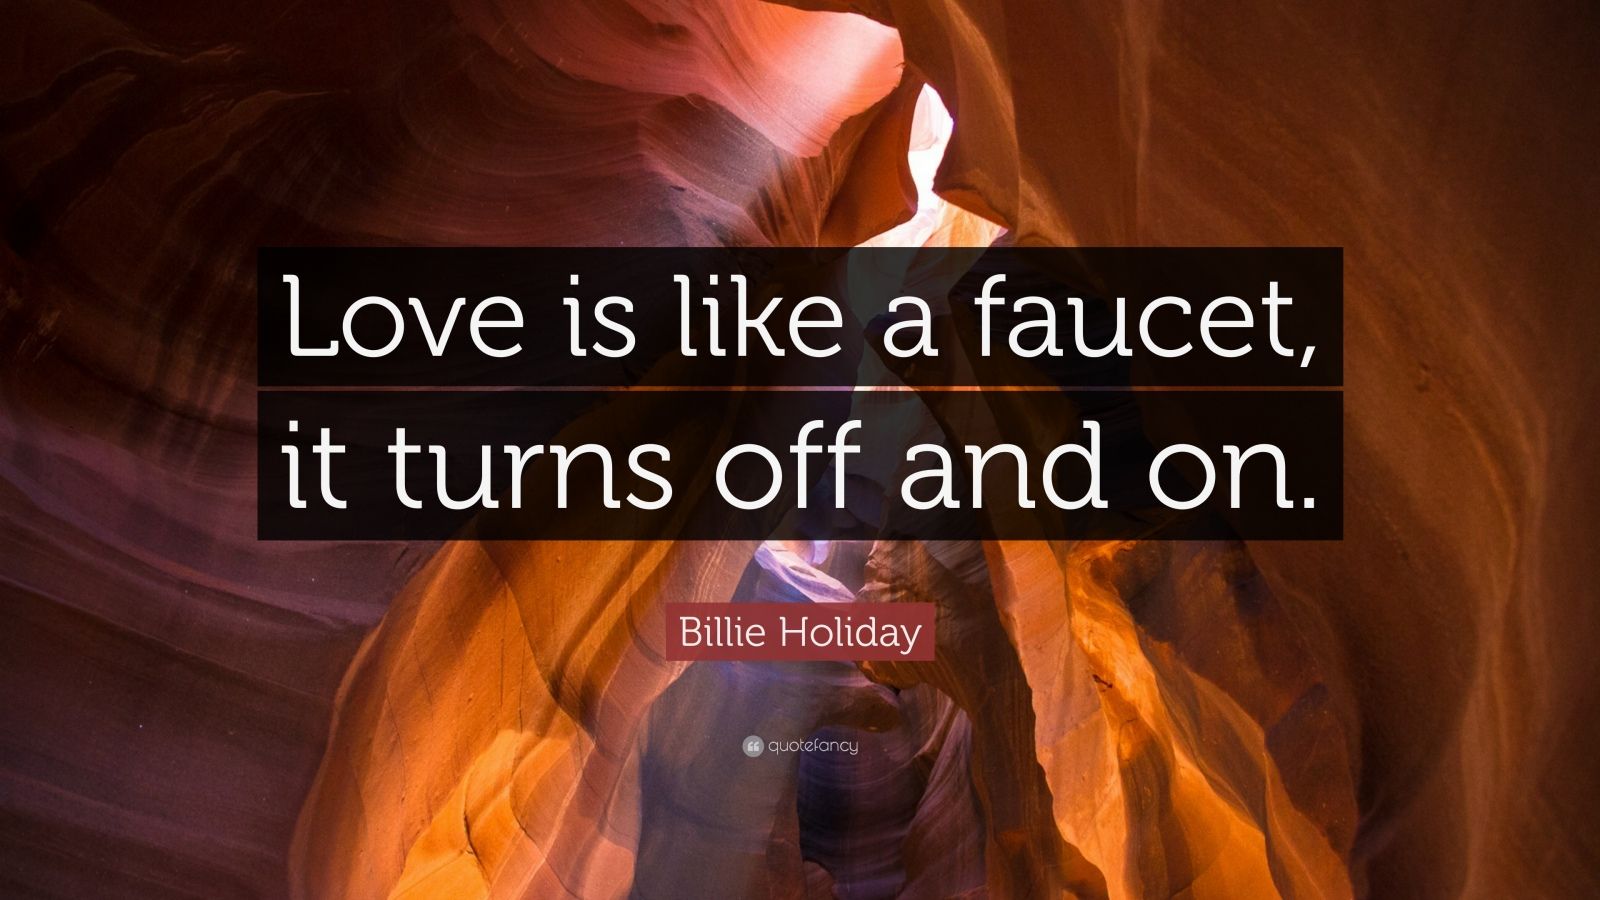 7 Billie Holiday Quotes About Love